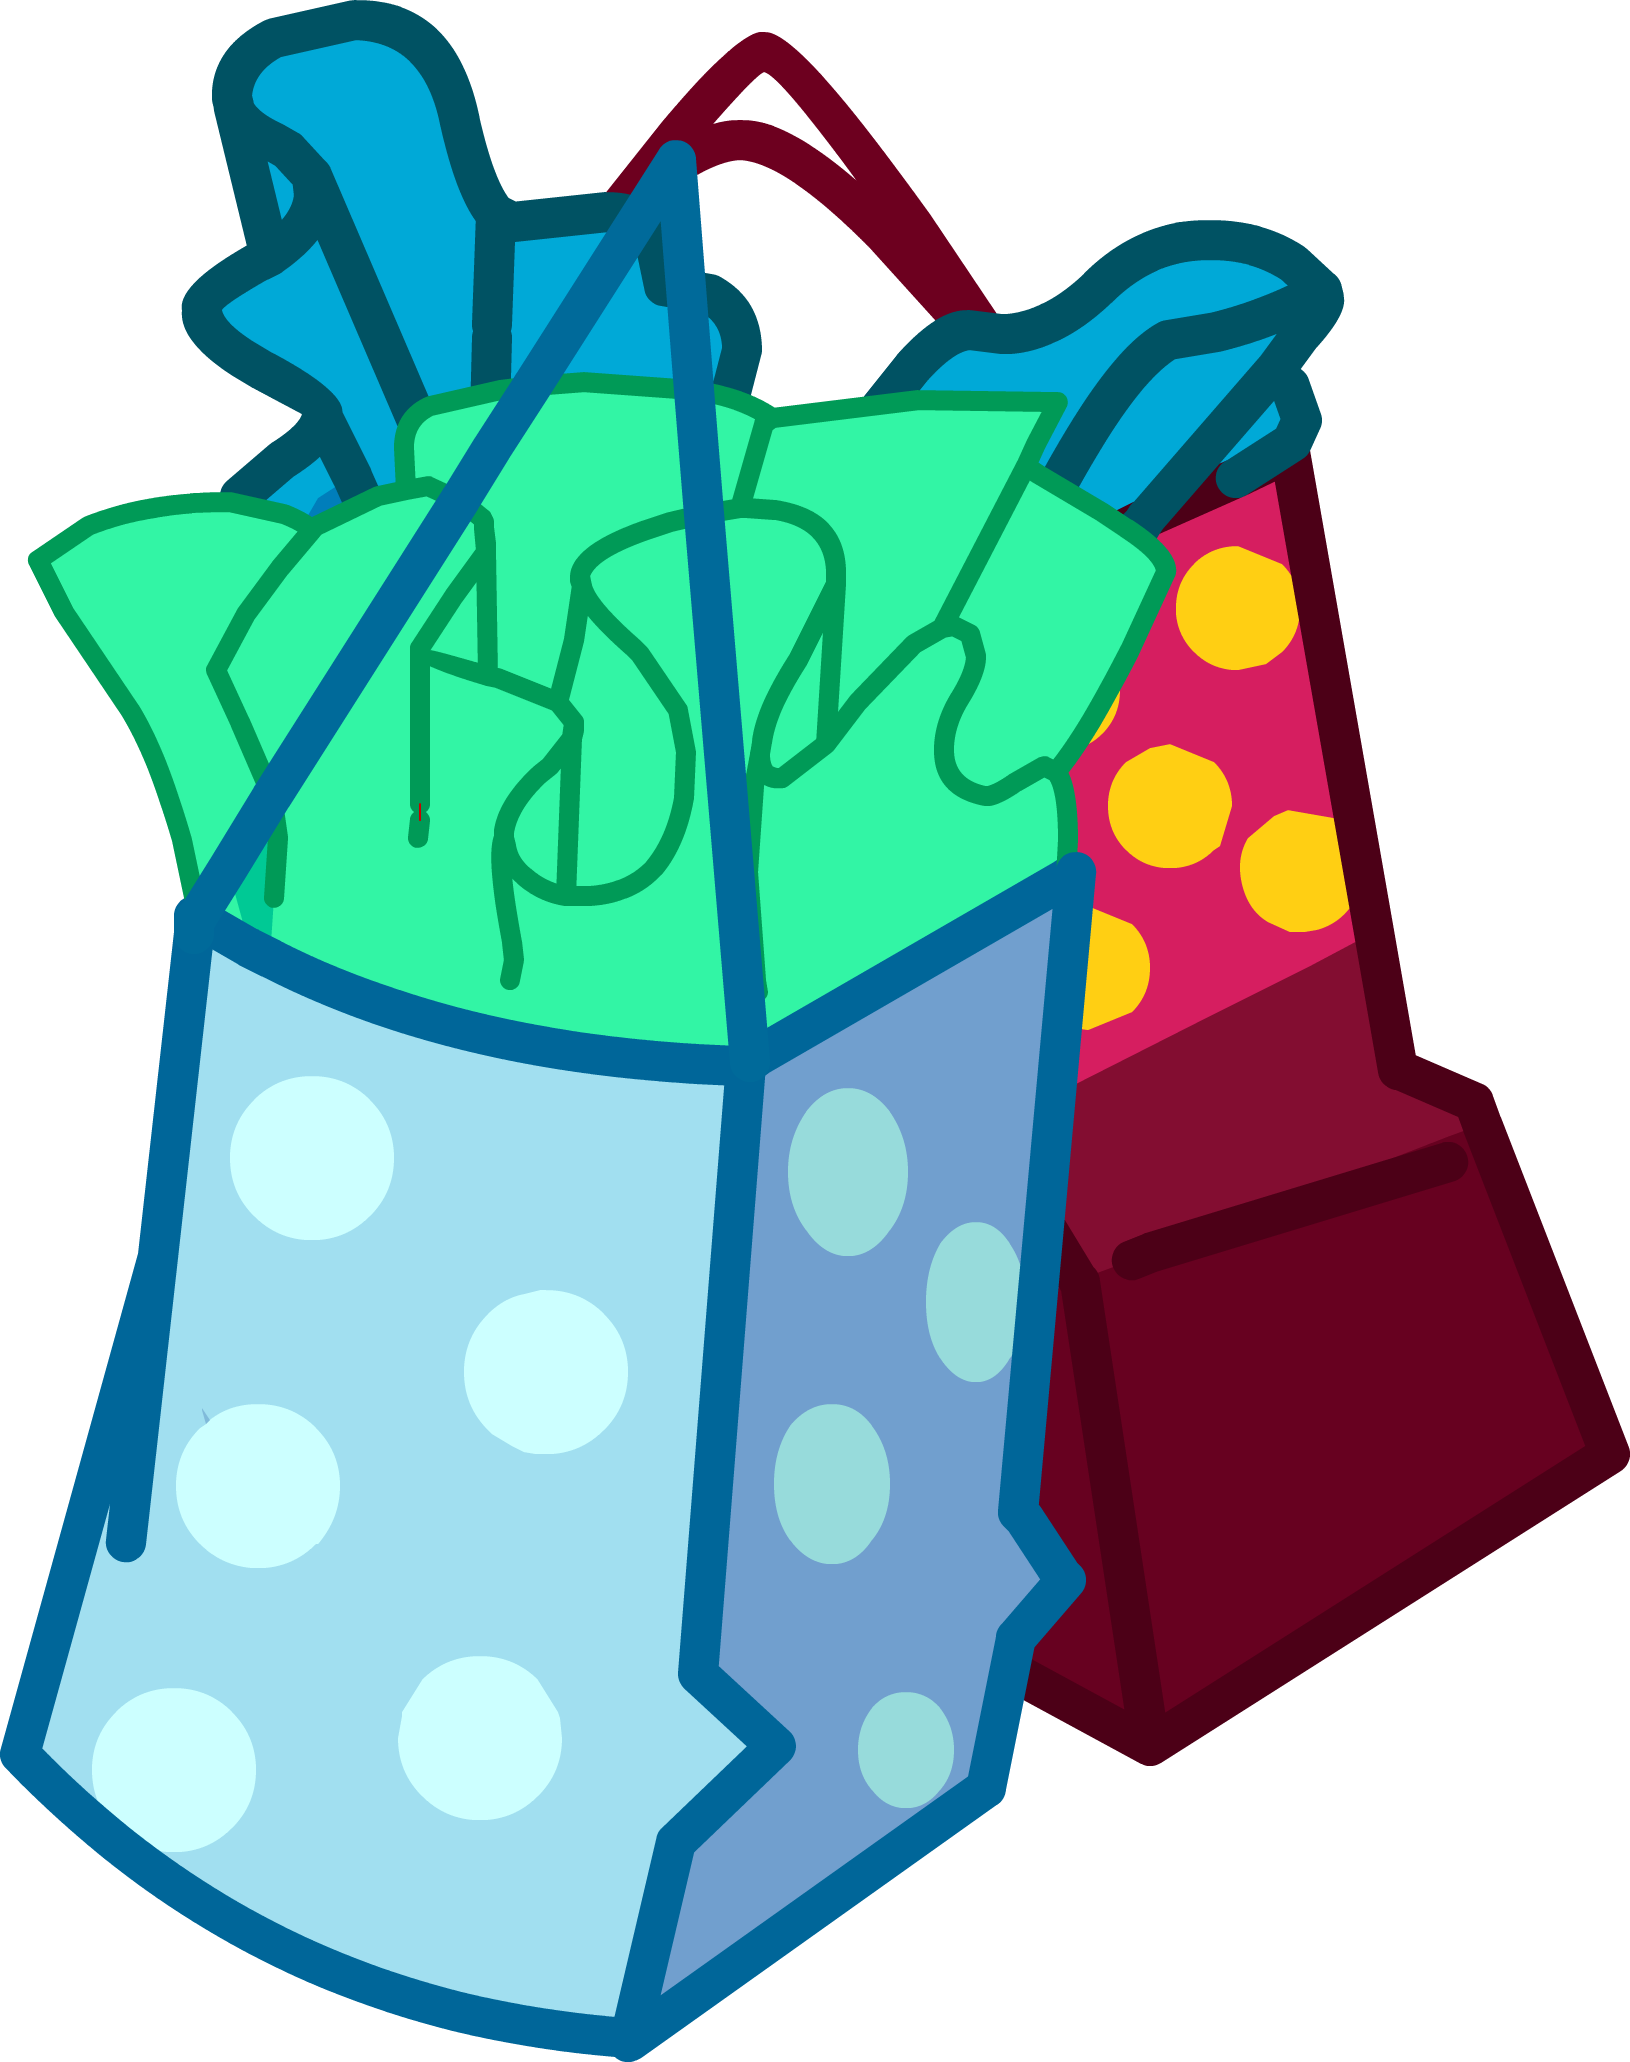 Cleaning Rooms - Club Penguin Shopping Bags (1630x2062)